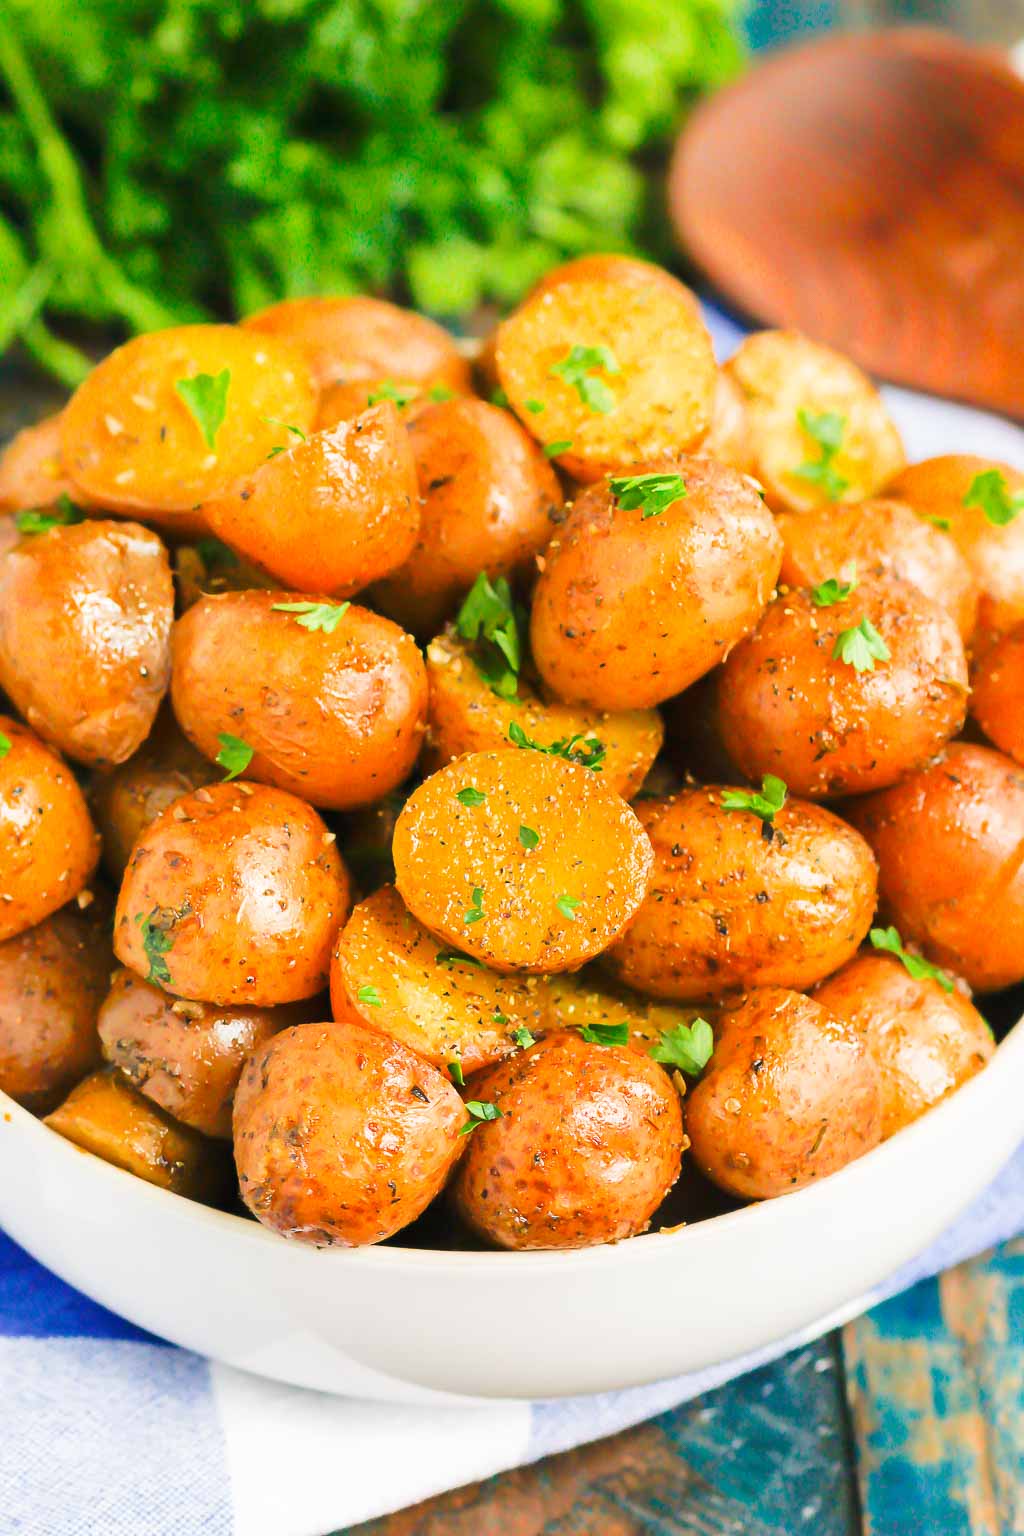 Instant Pot Garlic Herb Potatoes are tender, flavorful, and ready in just 20 minutes. Made with just a few simple ingredients, these potatoes are sure to be a delicious side dish for just about any meal! #potatoes #babypotatoes #instantpot #instantpotpotatoes #sidedish #thanksgivingsidedish